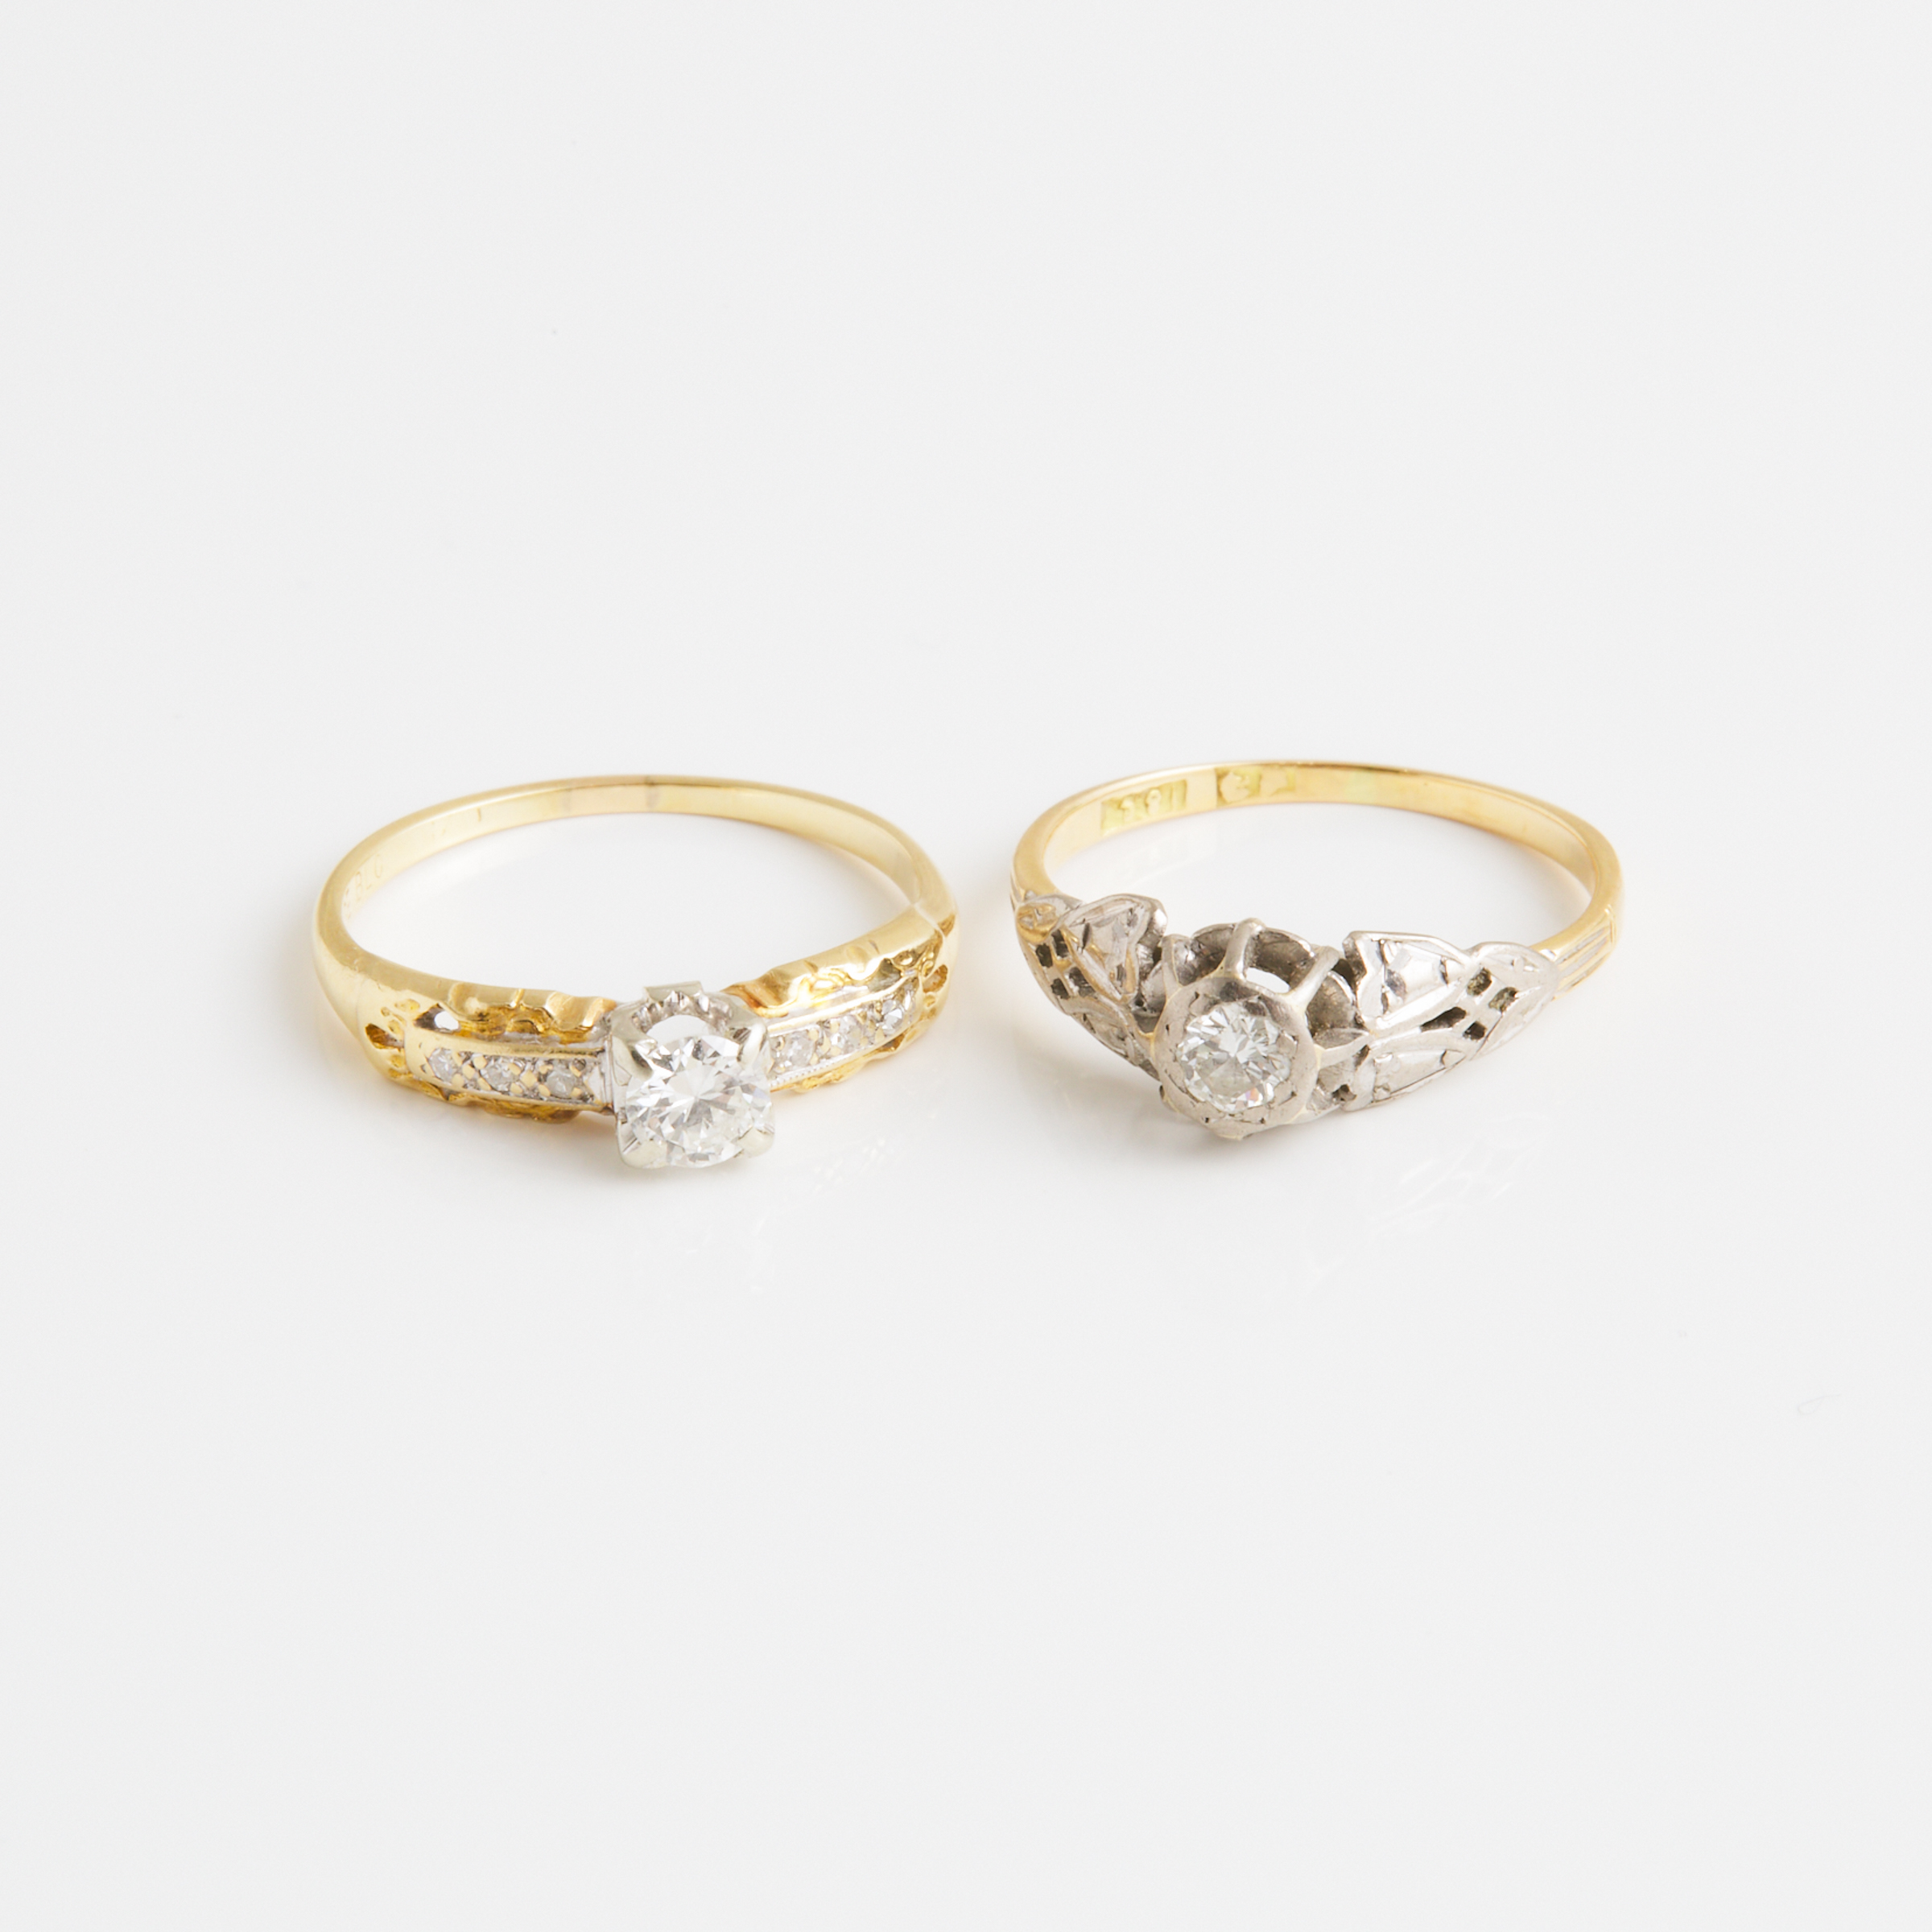 2 x Yellow And White Gold Rings